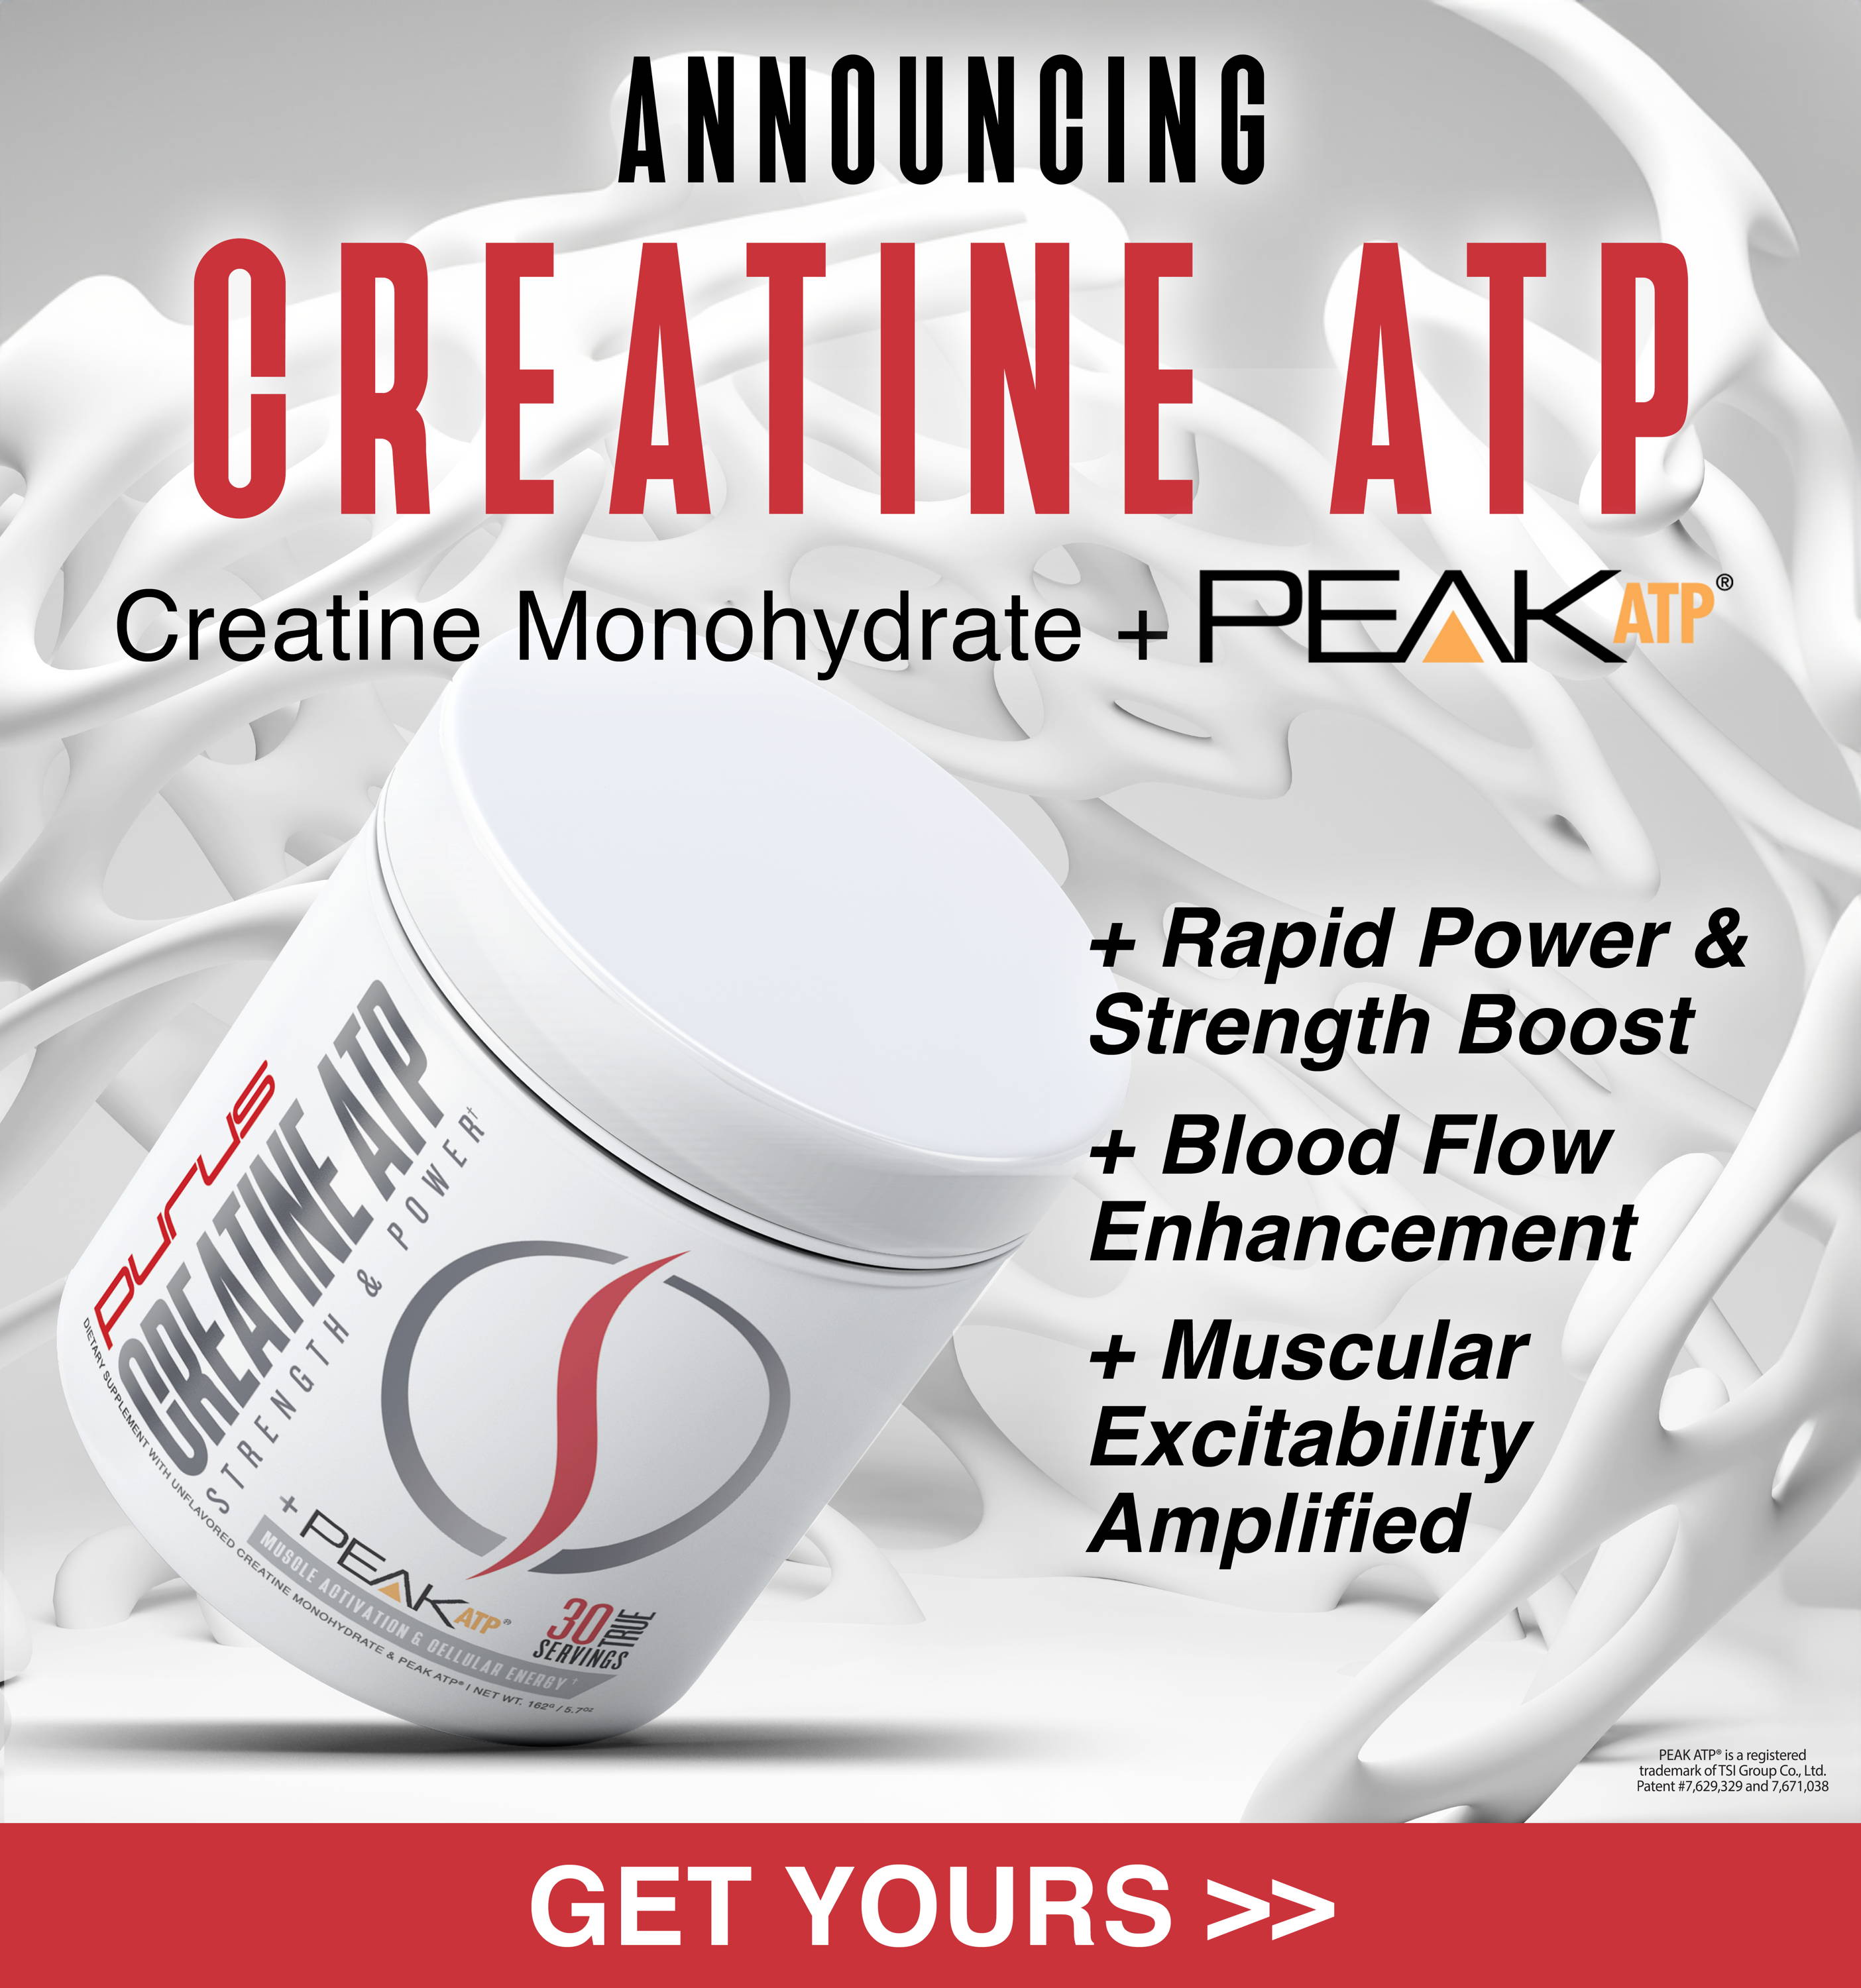 Bottle. ofCreatine ATP on white and gray background. Text: Announcing Creatine ATP Creatine Monohydrate + Peak ATP Rapid power & STrength Boost, Blood flow enhancement, muscular excitability amplified. Get yours